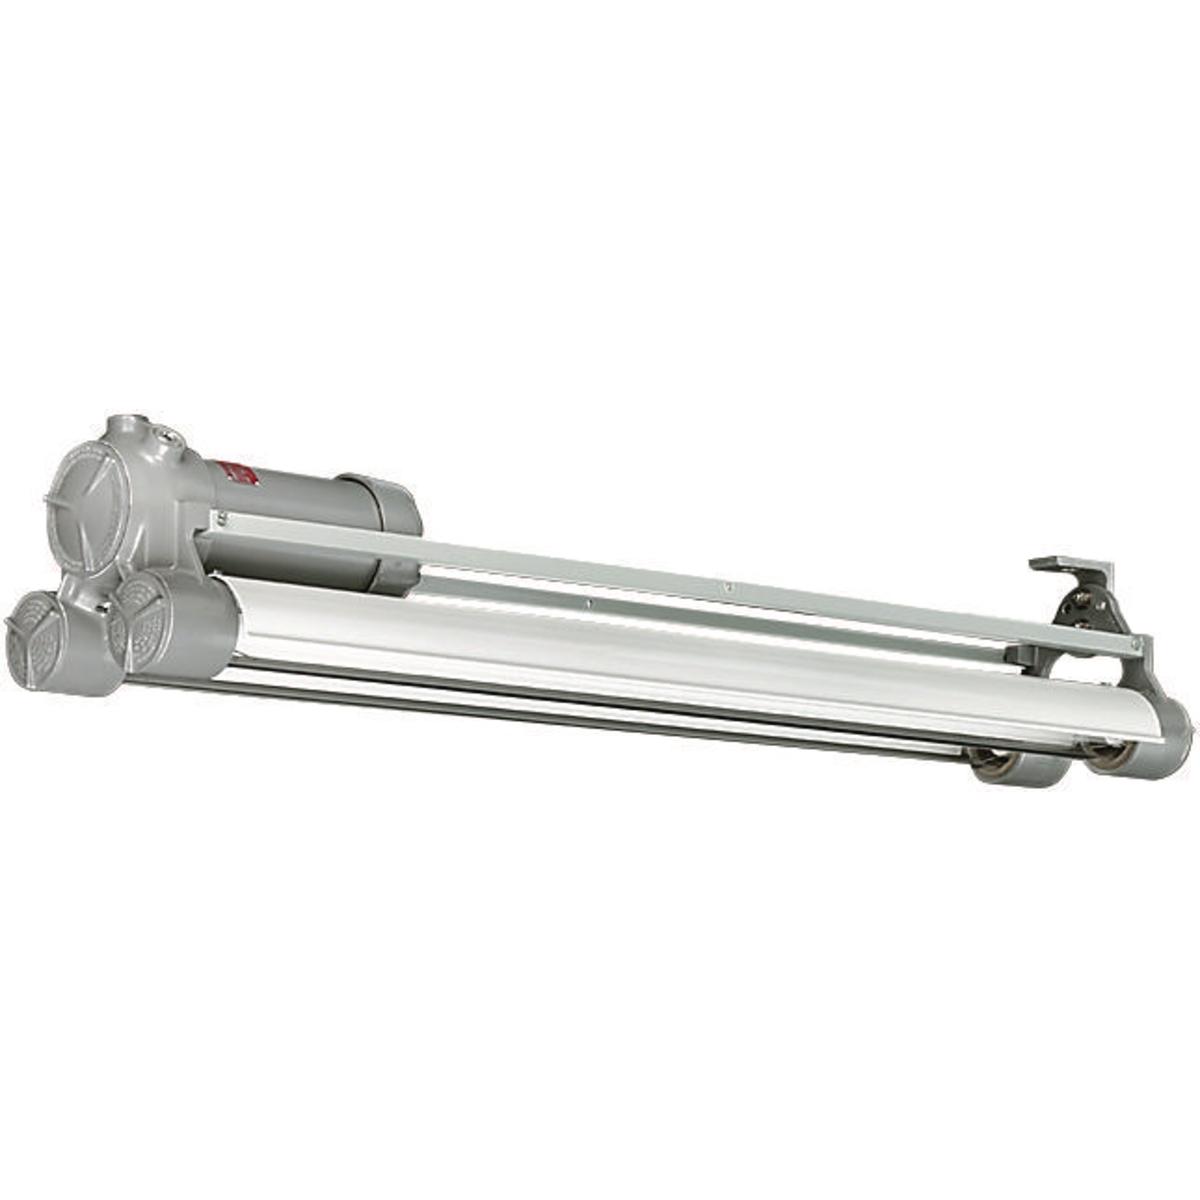 Hubbell HFX-800-12-WL HFX 60W Fluorescent 120V 2 Lamp with Lamps+E4786  ; UL Listed and labeled for use inside paint spray booths and rooms ; 2’ nominal compact models facilitate use in areas too small for nominal 4’ models, or where the light must be confined ; Standard balla